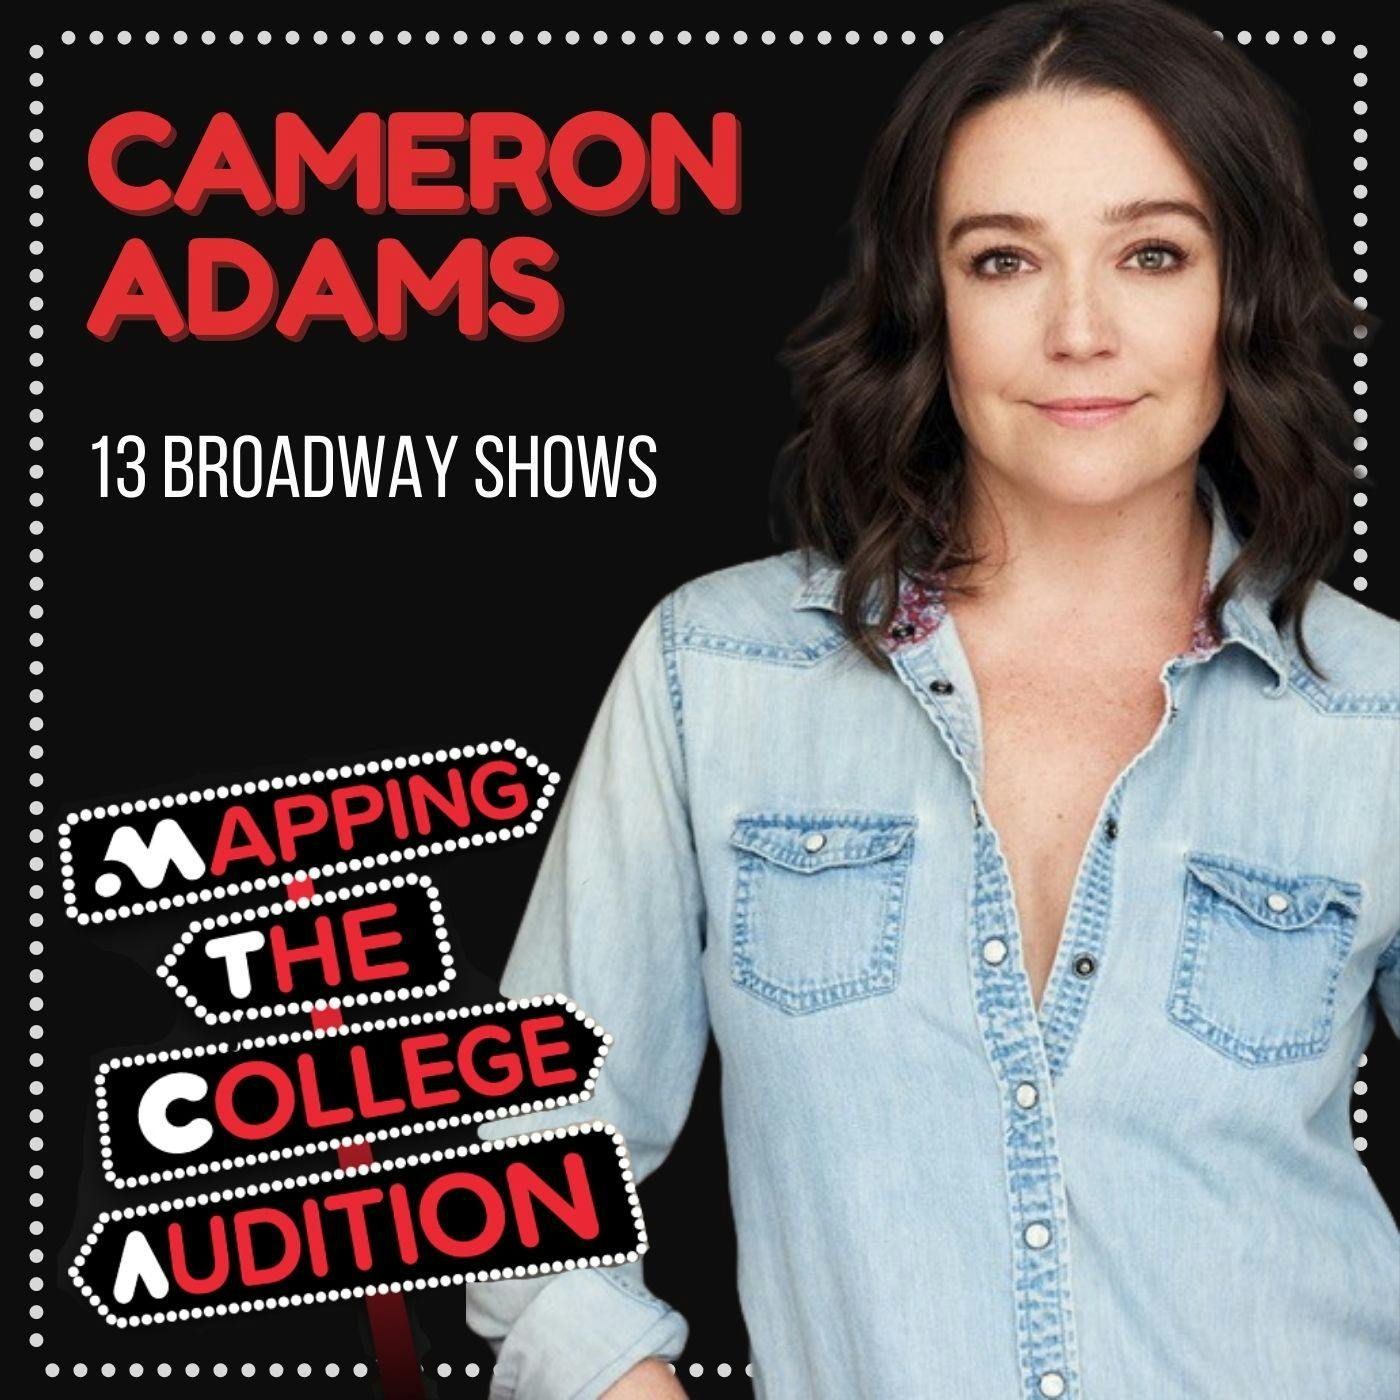 Ep. 56 (AE): Cameron Adams (13 Broadway shows) on Thriving in the Ensemble